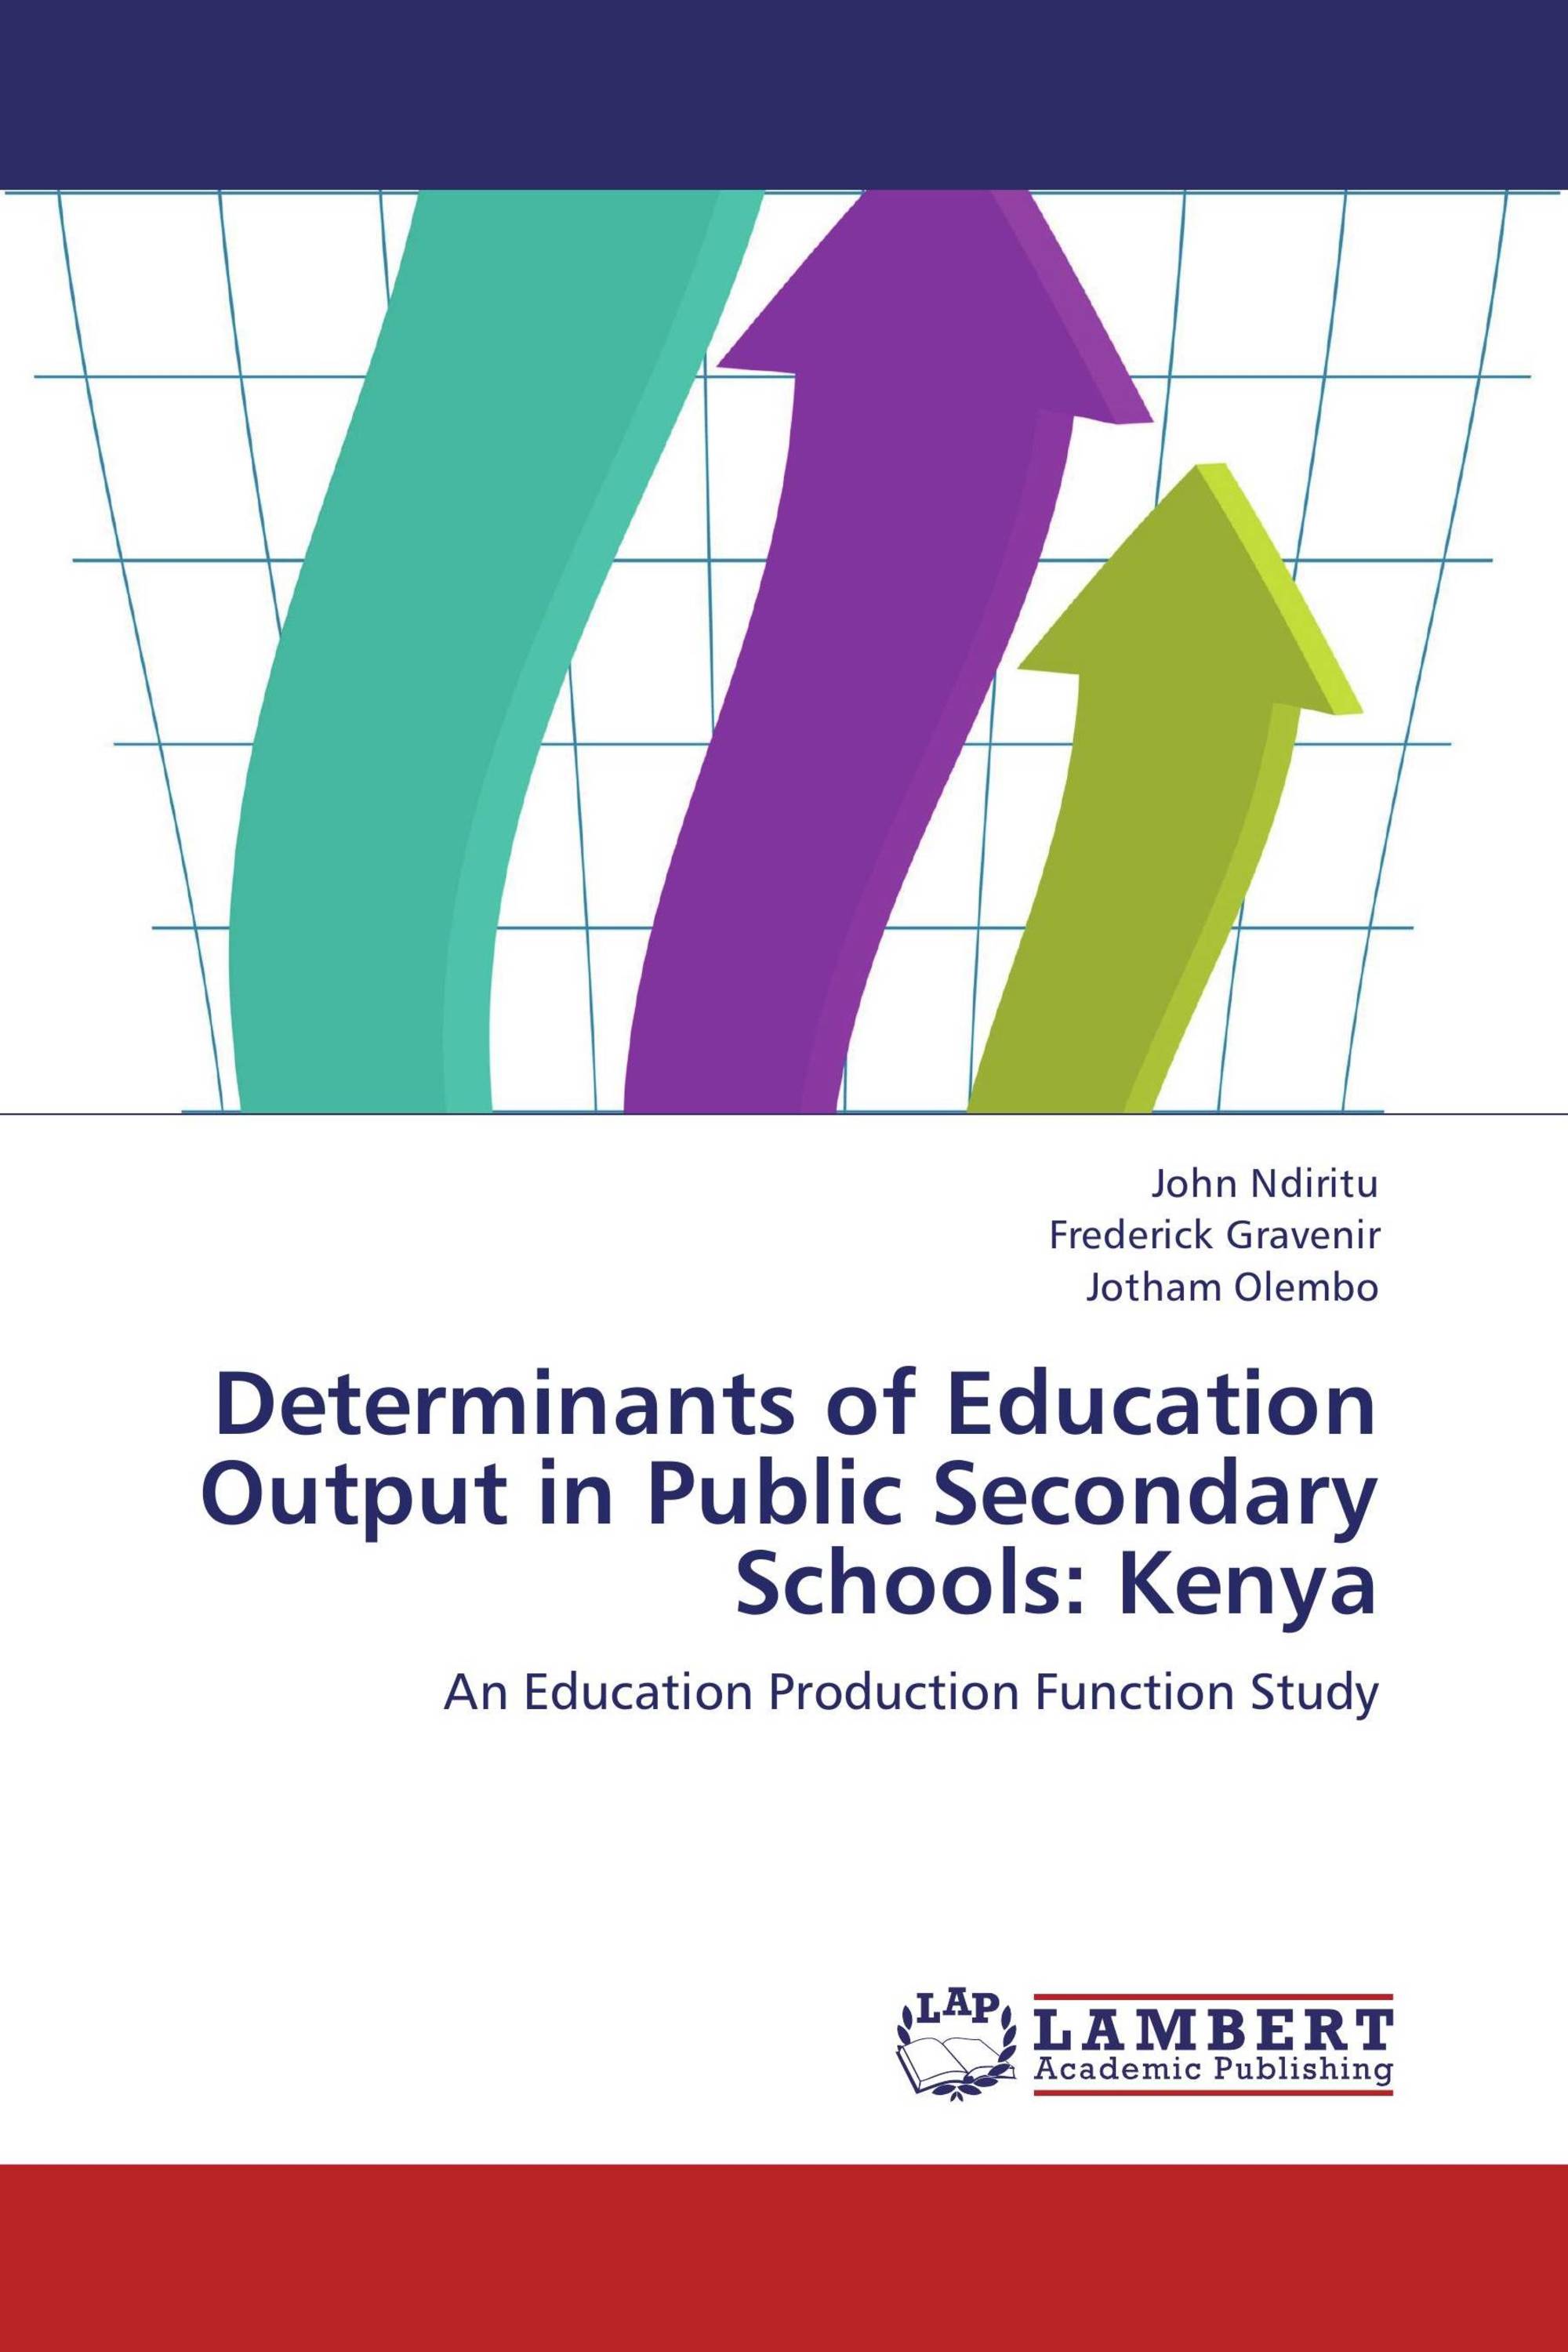 thesis determinants of education